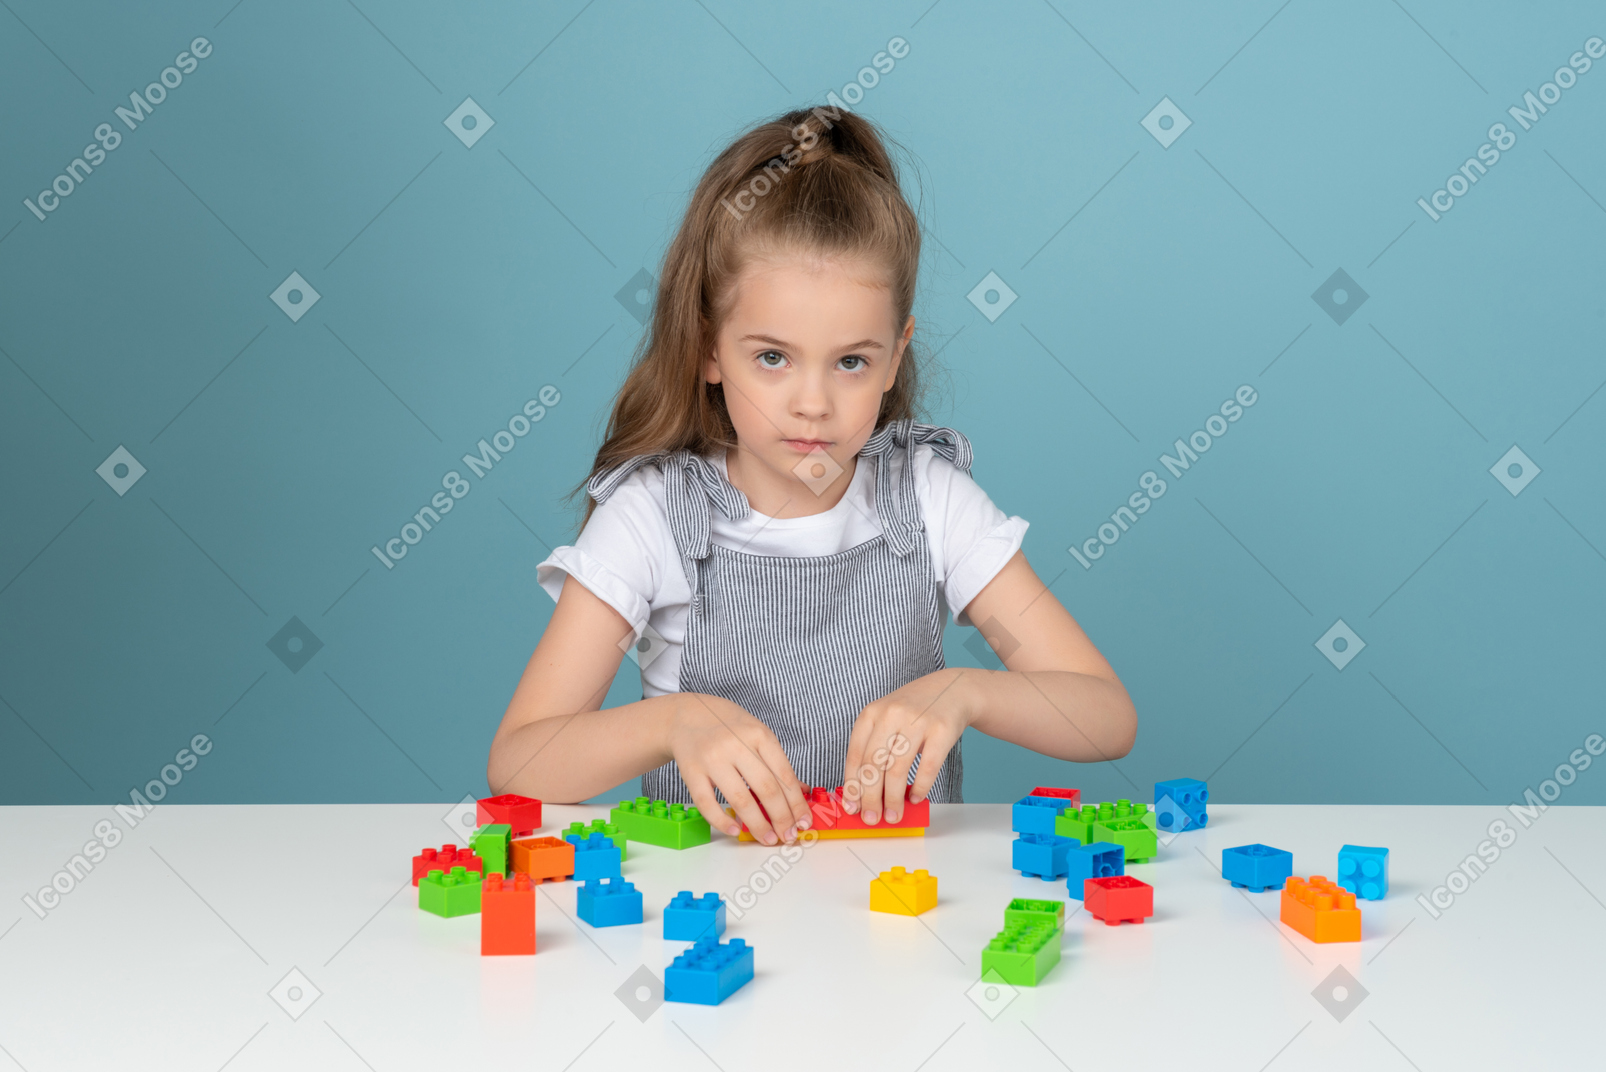 Little girl playing with building blocks and looking at camera